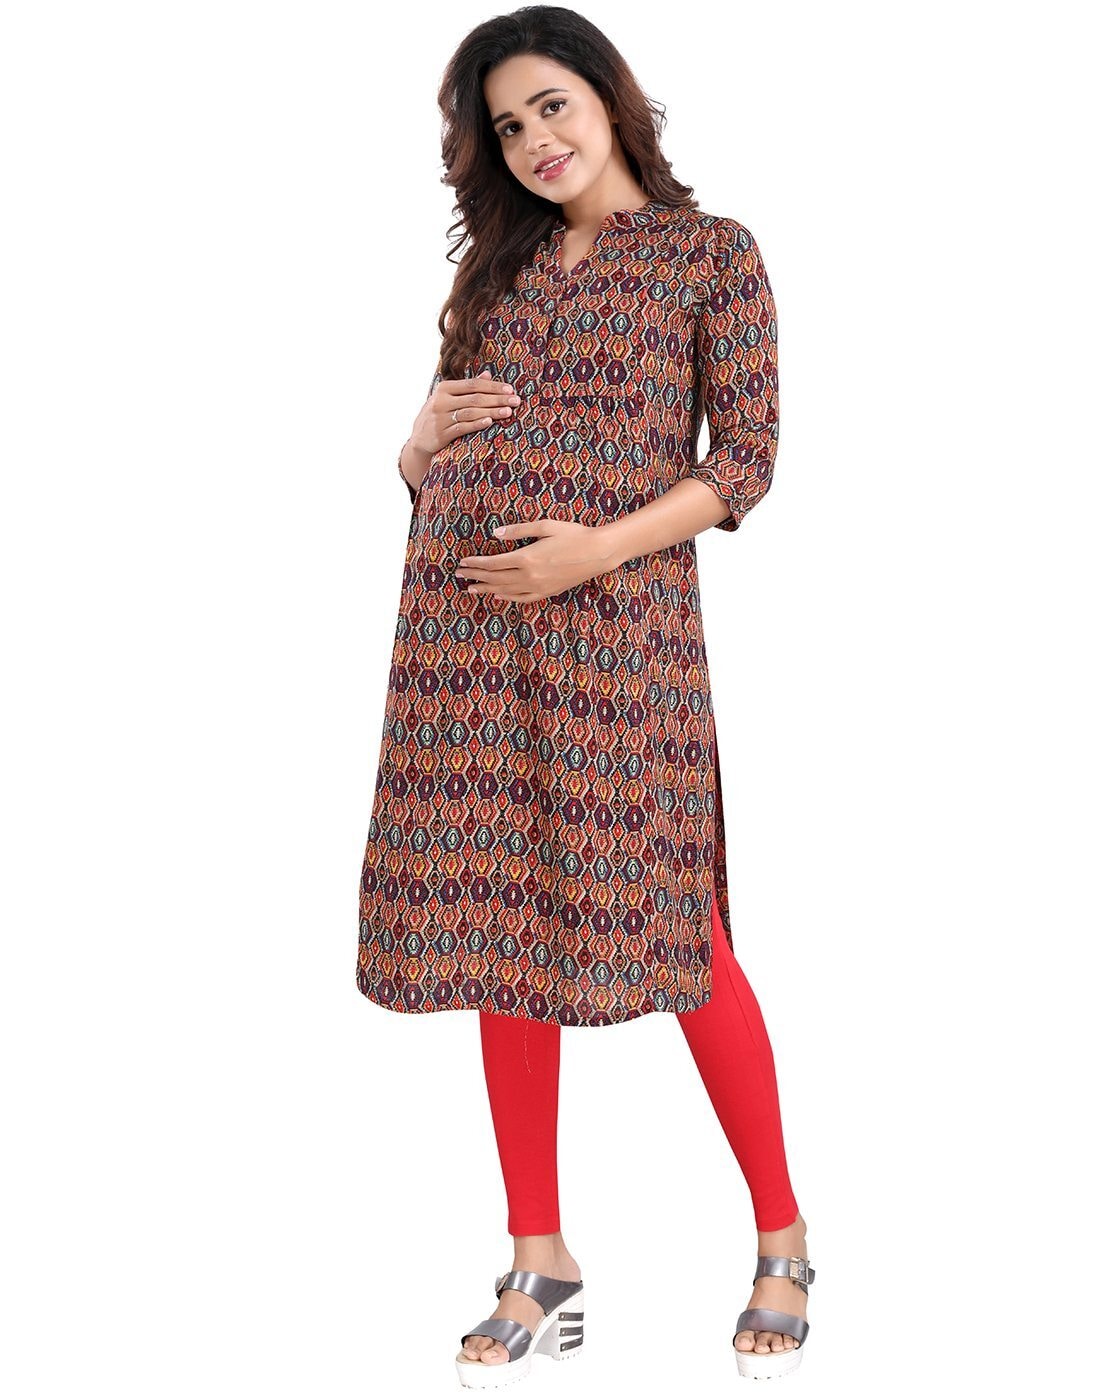 Buy Women's Cotton Floral Printed Anarkali Maternity Feeding Kurti and Maxi  Dress with Concealed Zipper for Breast Feeding Baby in Pregnancy wear at  Amazon.in